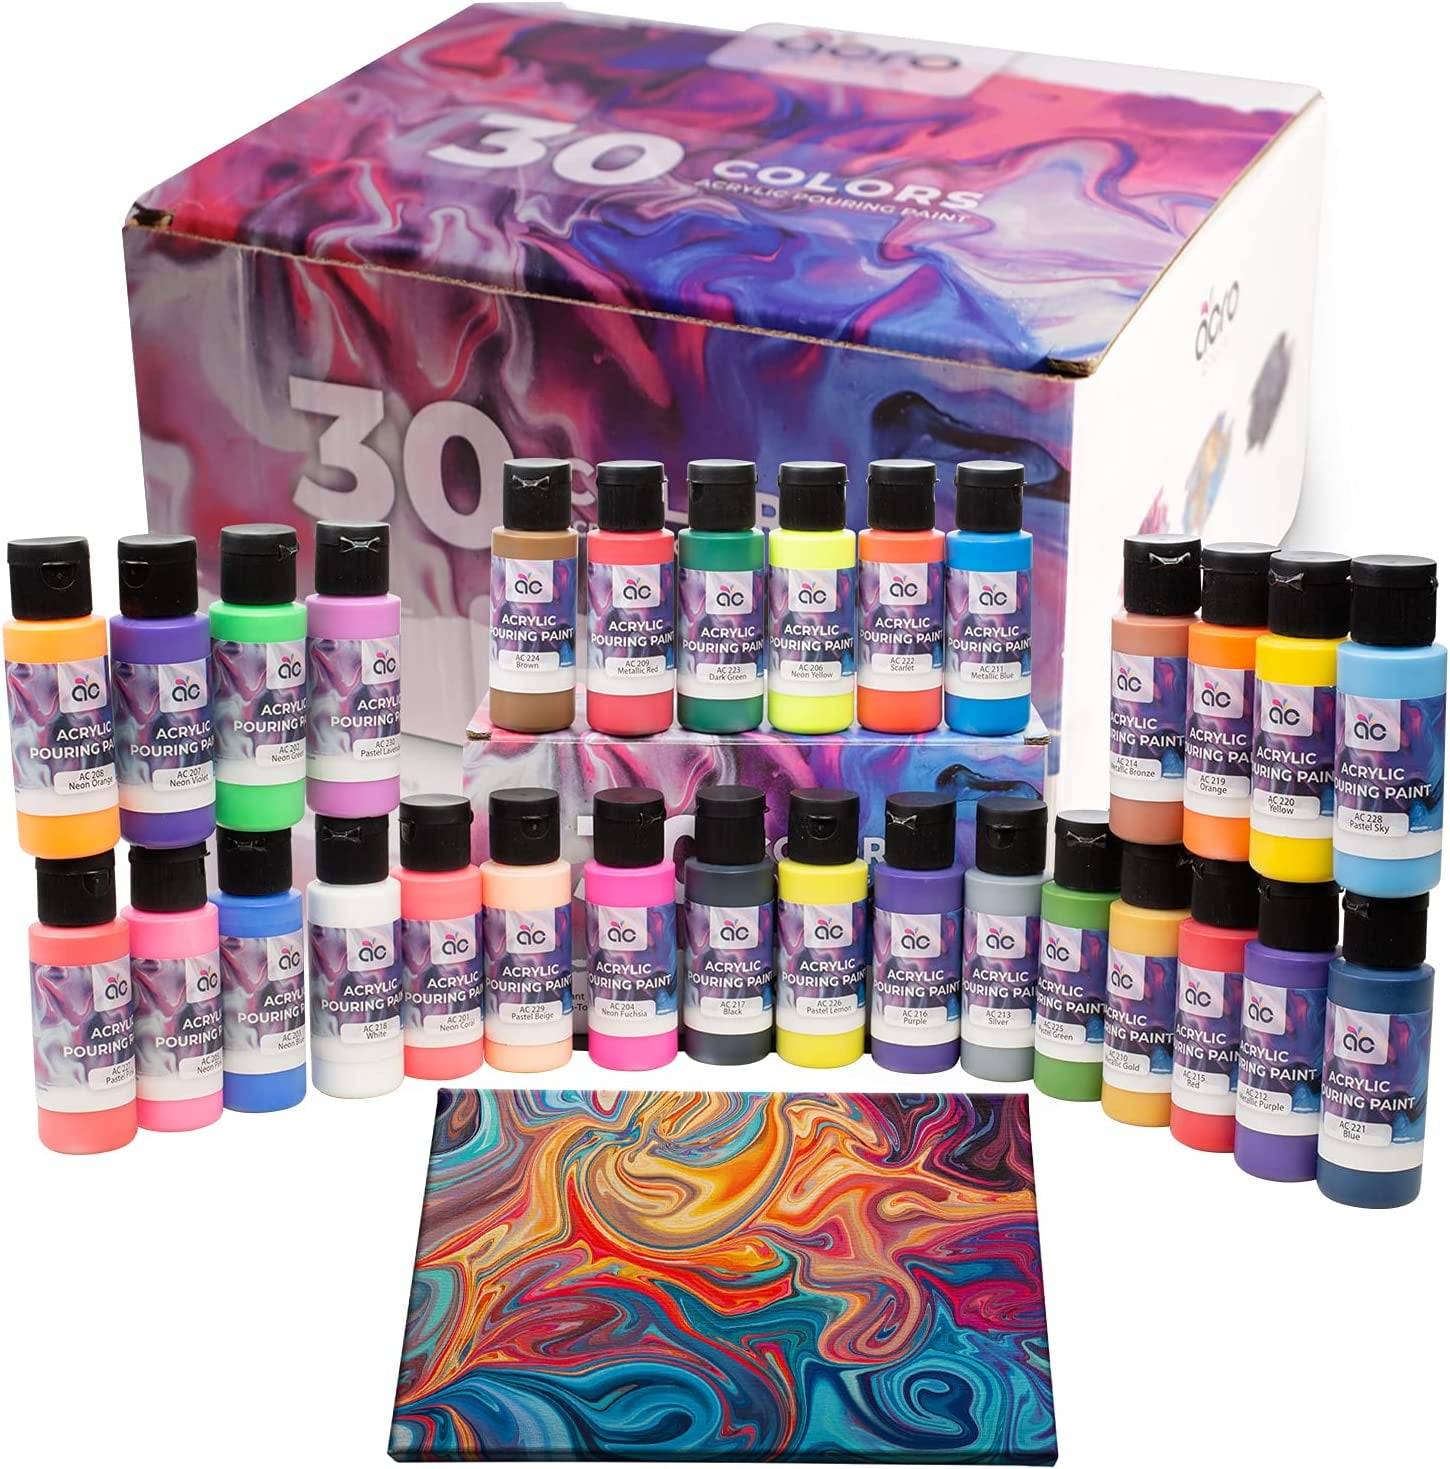 Acrylic Pouring Paint Set, Pouring Medium for Acrylic Paint, Pouring  Paint Cotton Canvases, High Flow Pouring Paint Supplies, Art Supply